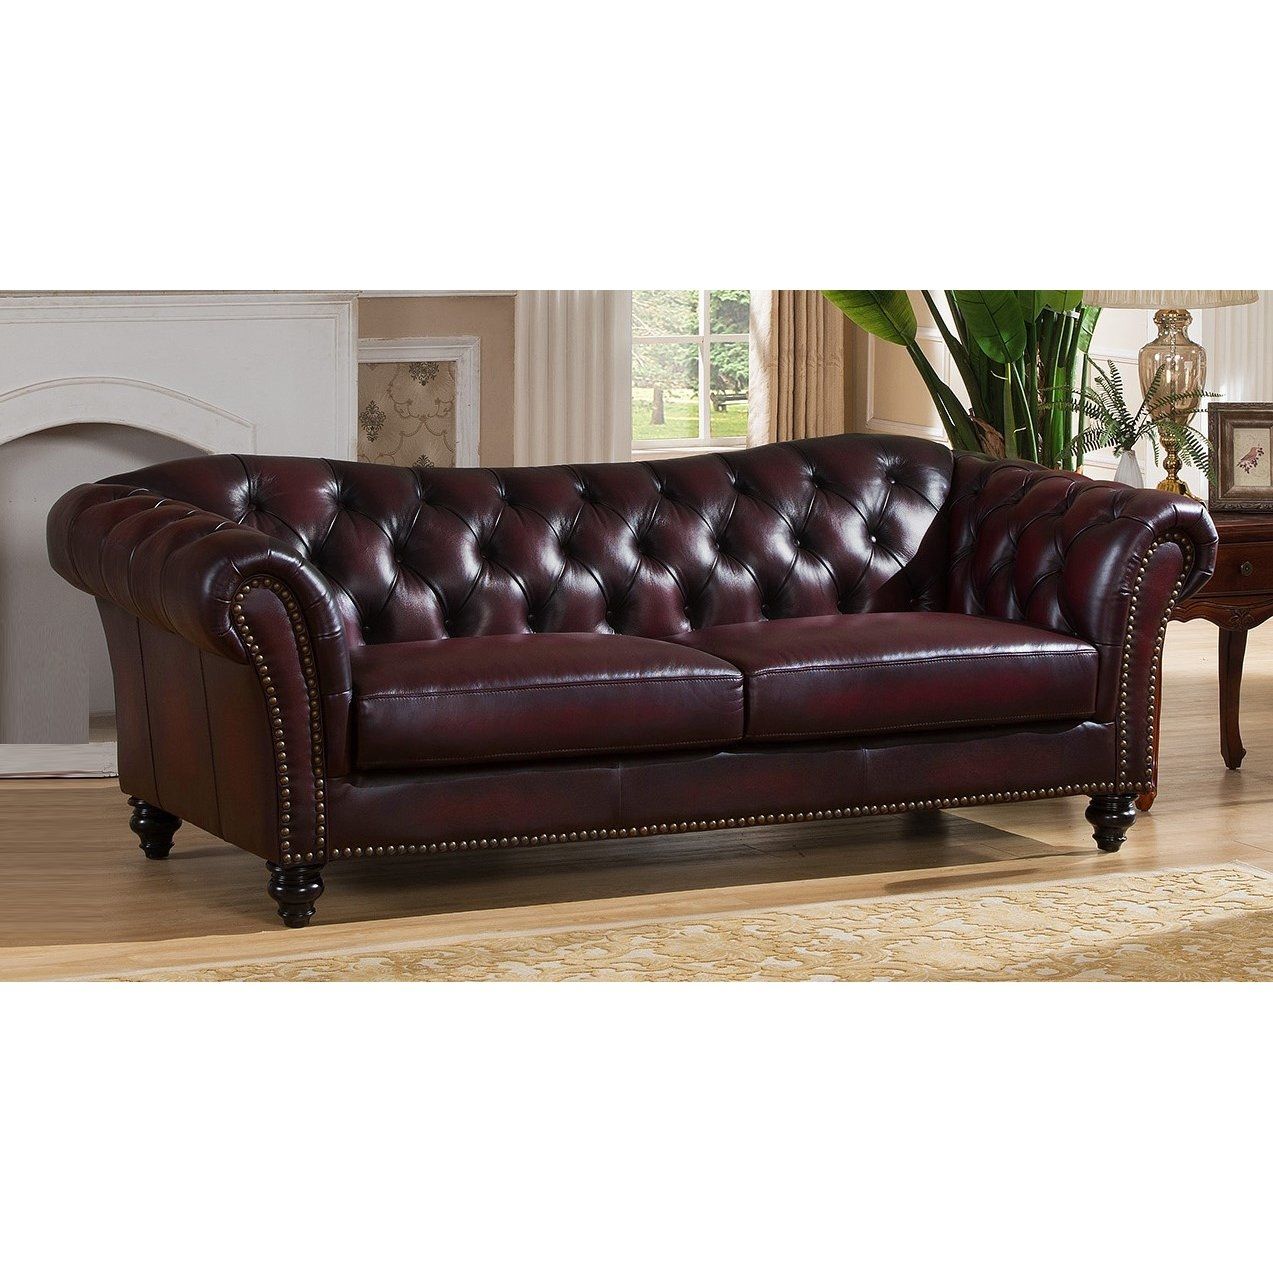 Storage Canterbury Leather Chesterfield Style 3 Seater Sofa Throughout Canterbury Leather Sofas (View 1 of 15)